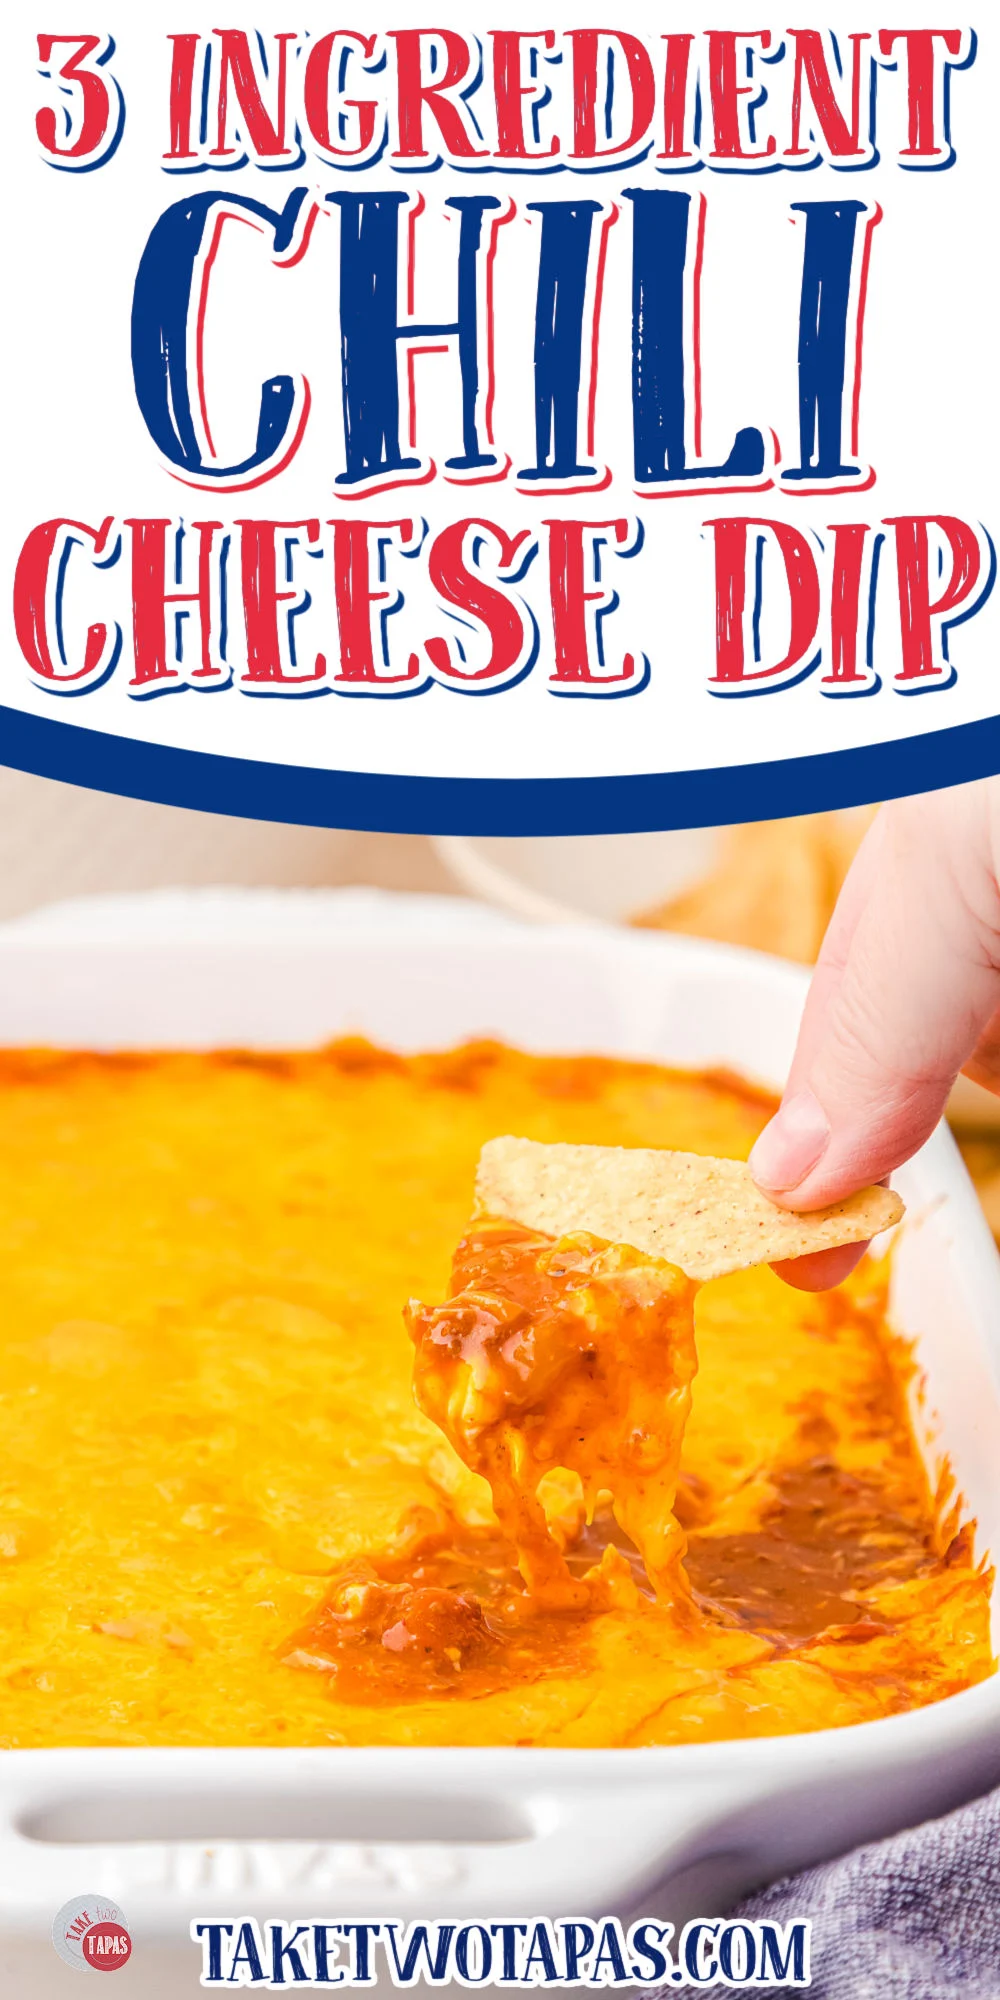 tortilla chip scooping dip with white banner and text